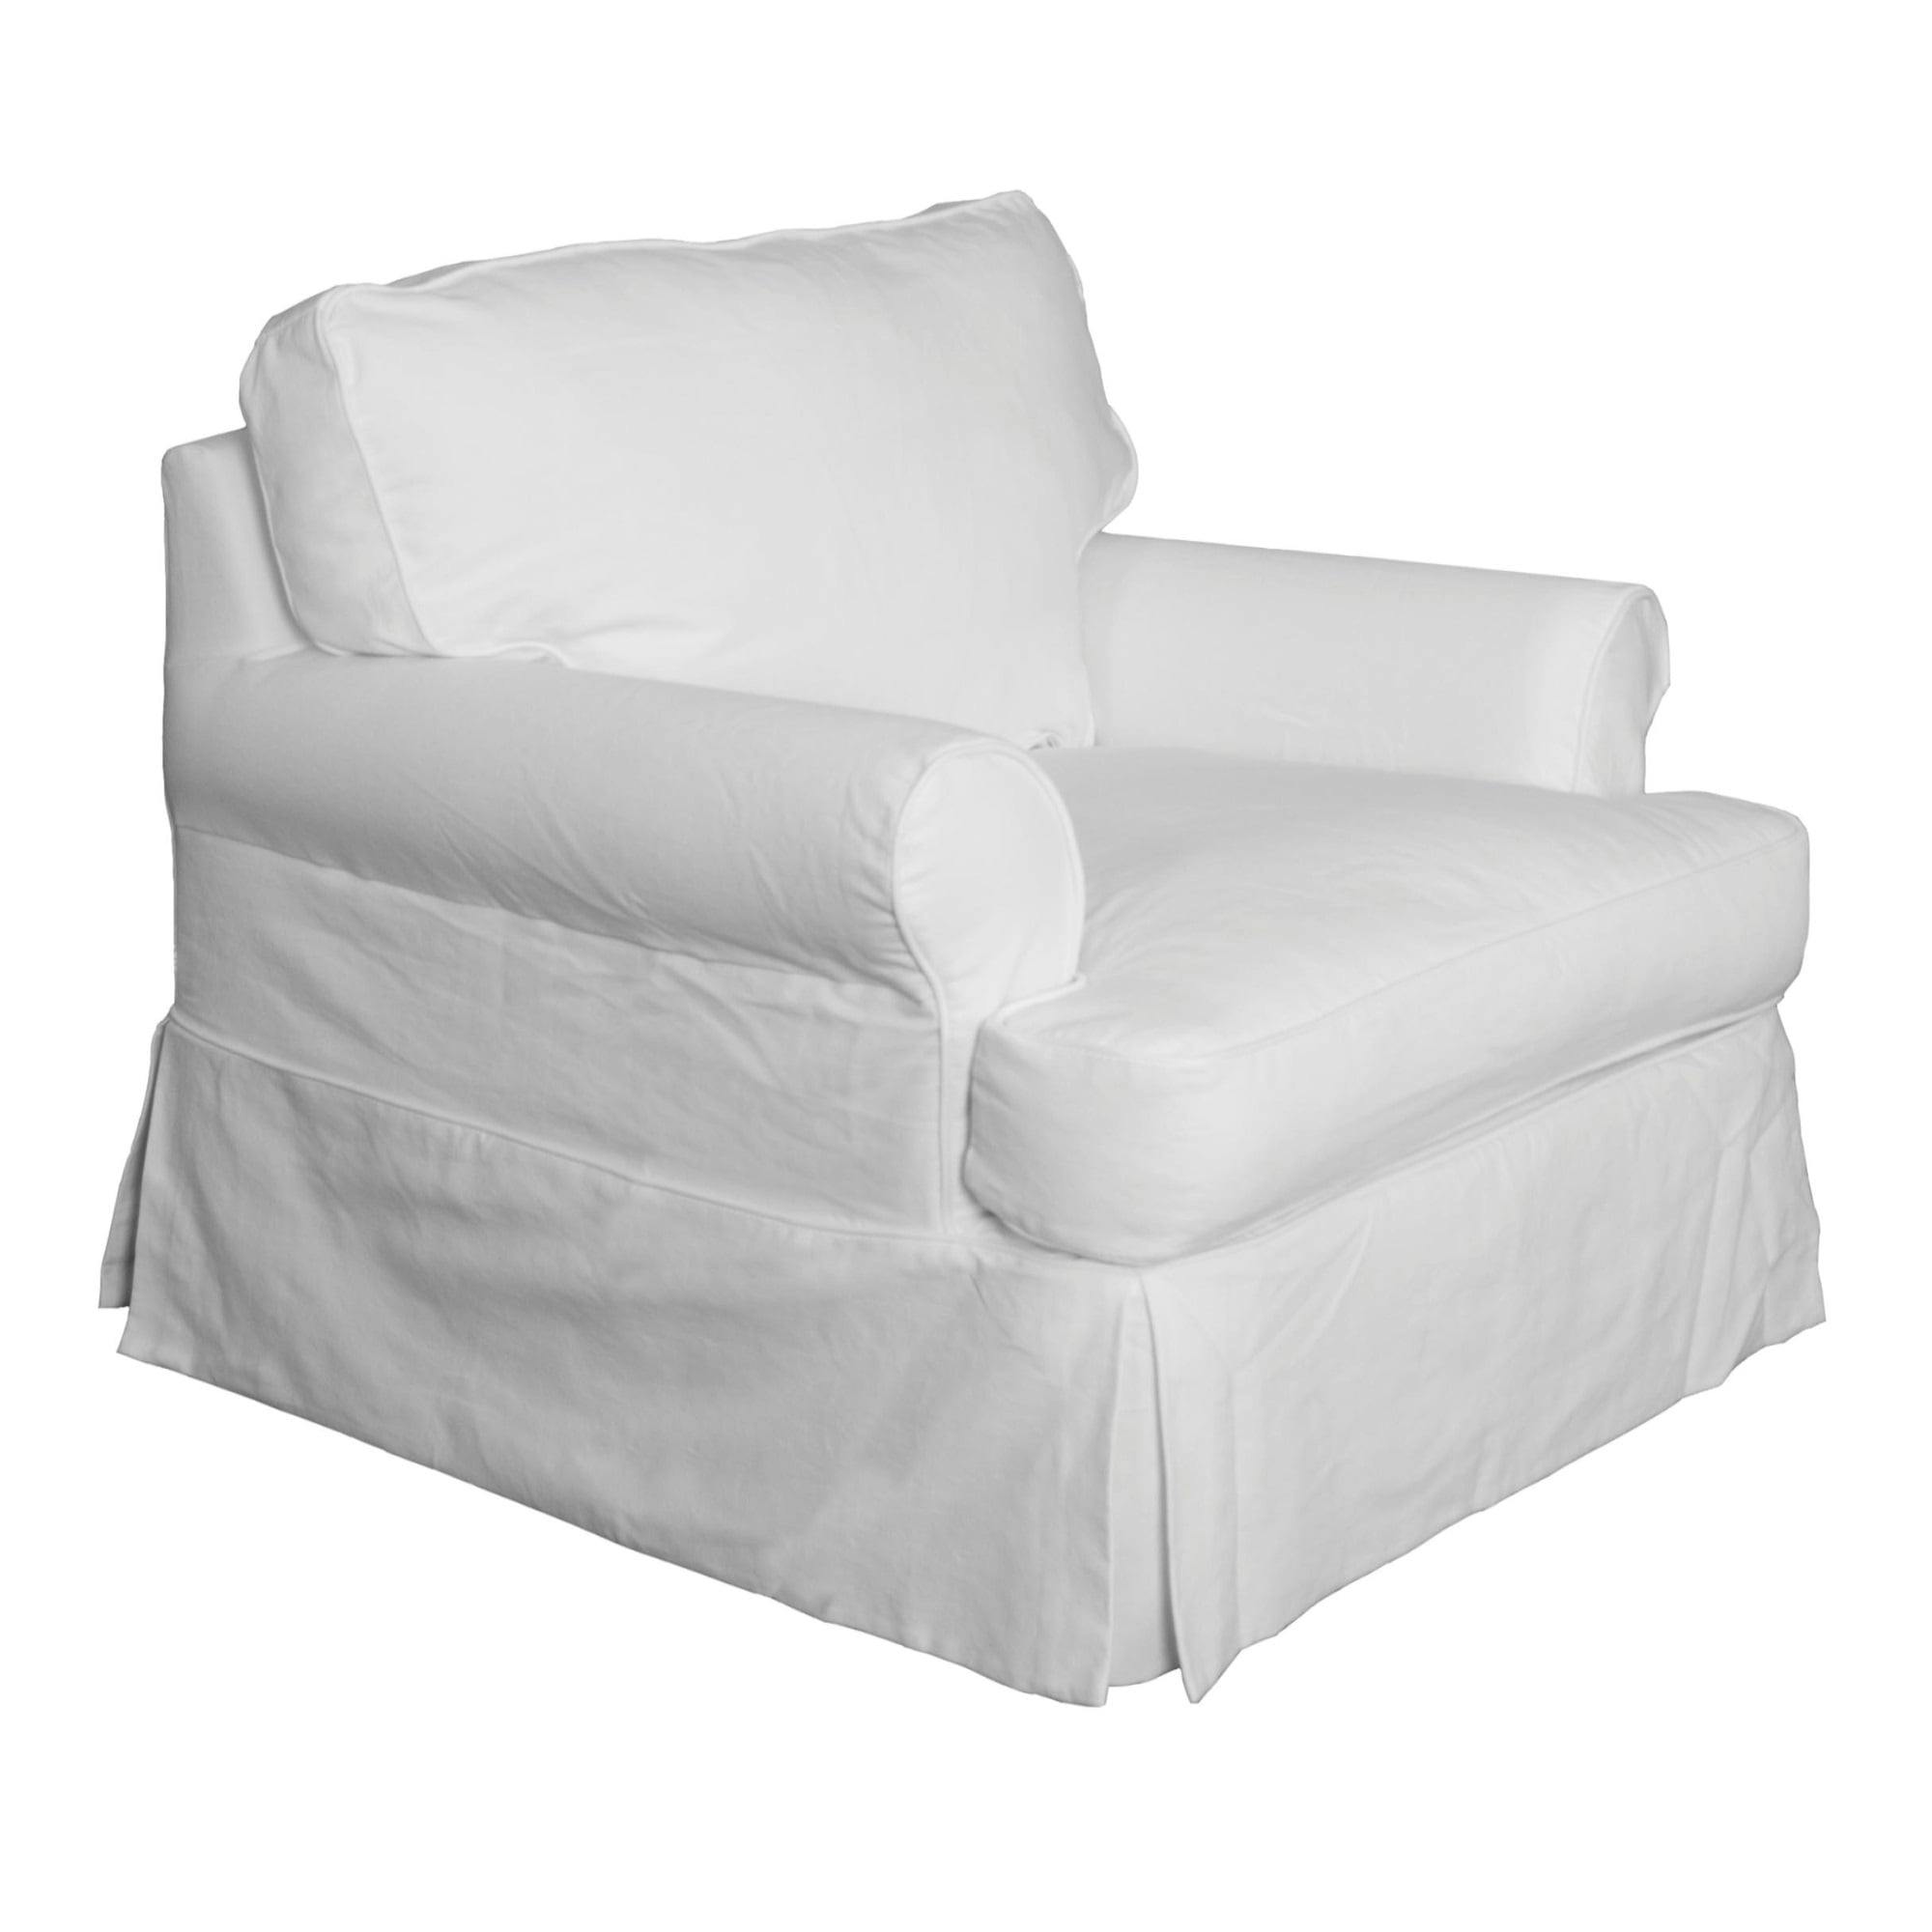 Warm White Traditional Cotton T-Cushion Chair Slipcover